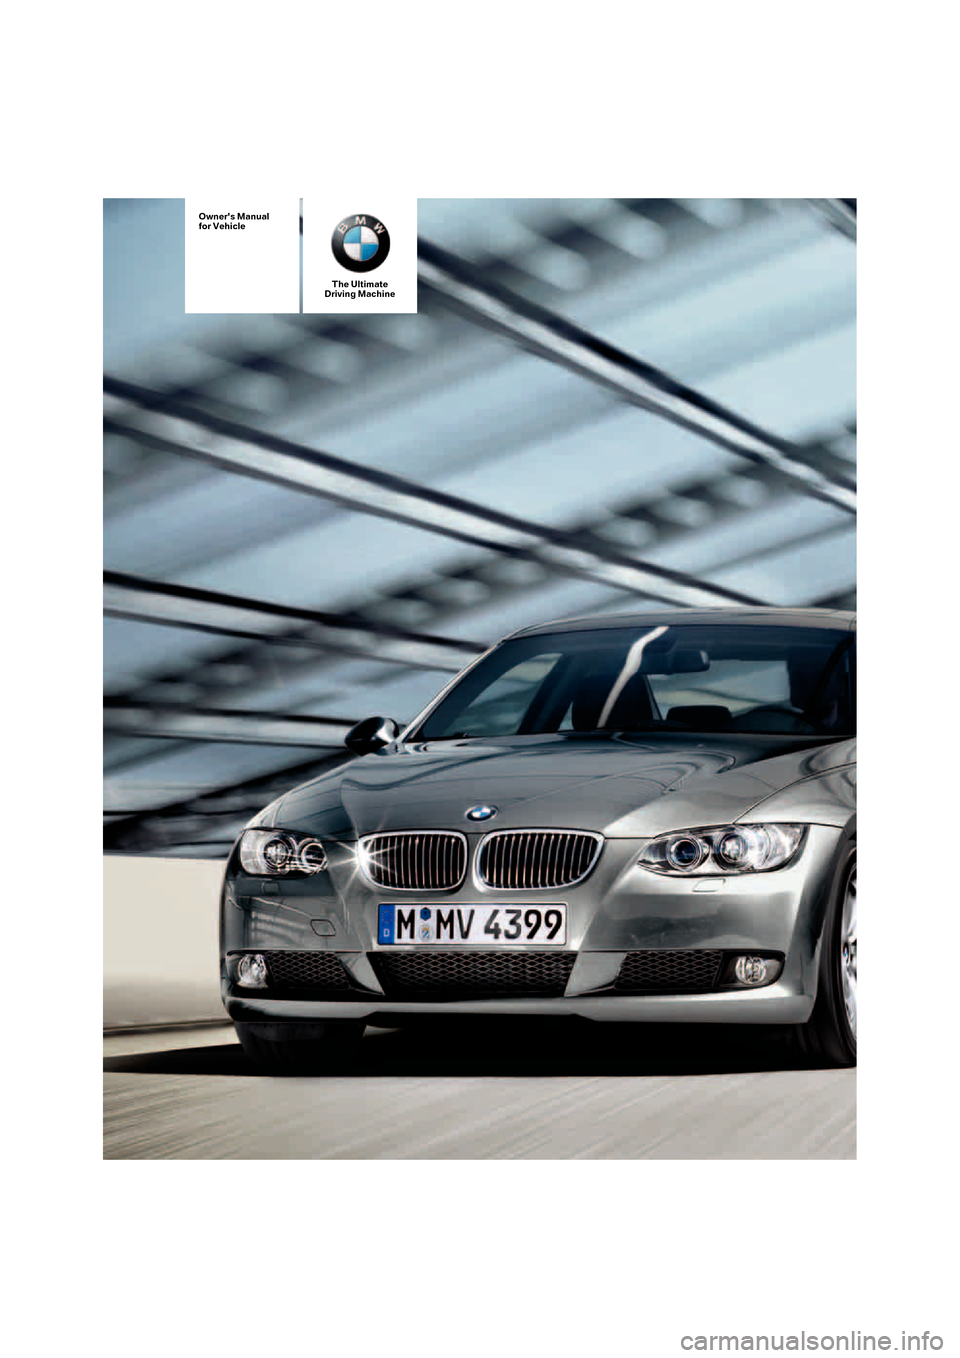 BMW 335I COUPE 2008 E92 Owners Manual The Ultimate
Driving Machine
Owners Manual
for Vehicle 